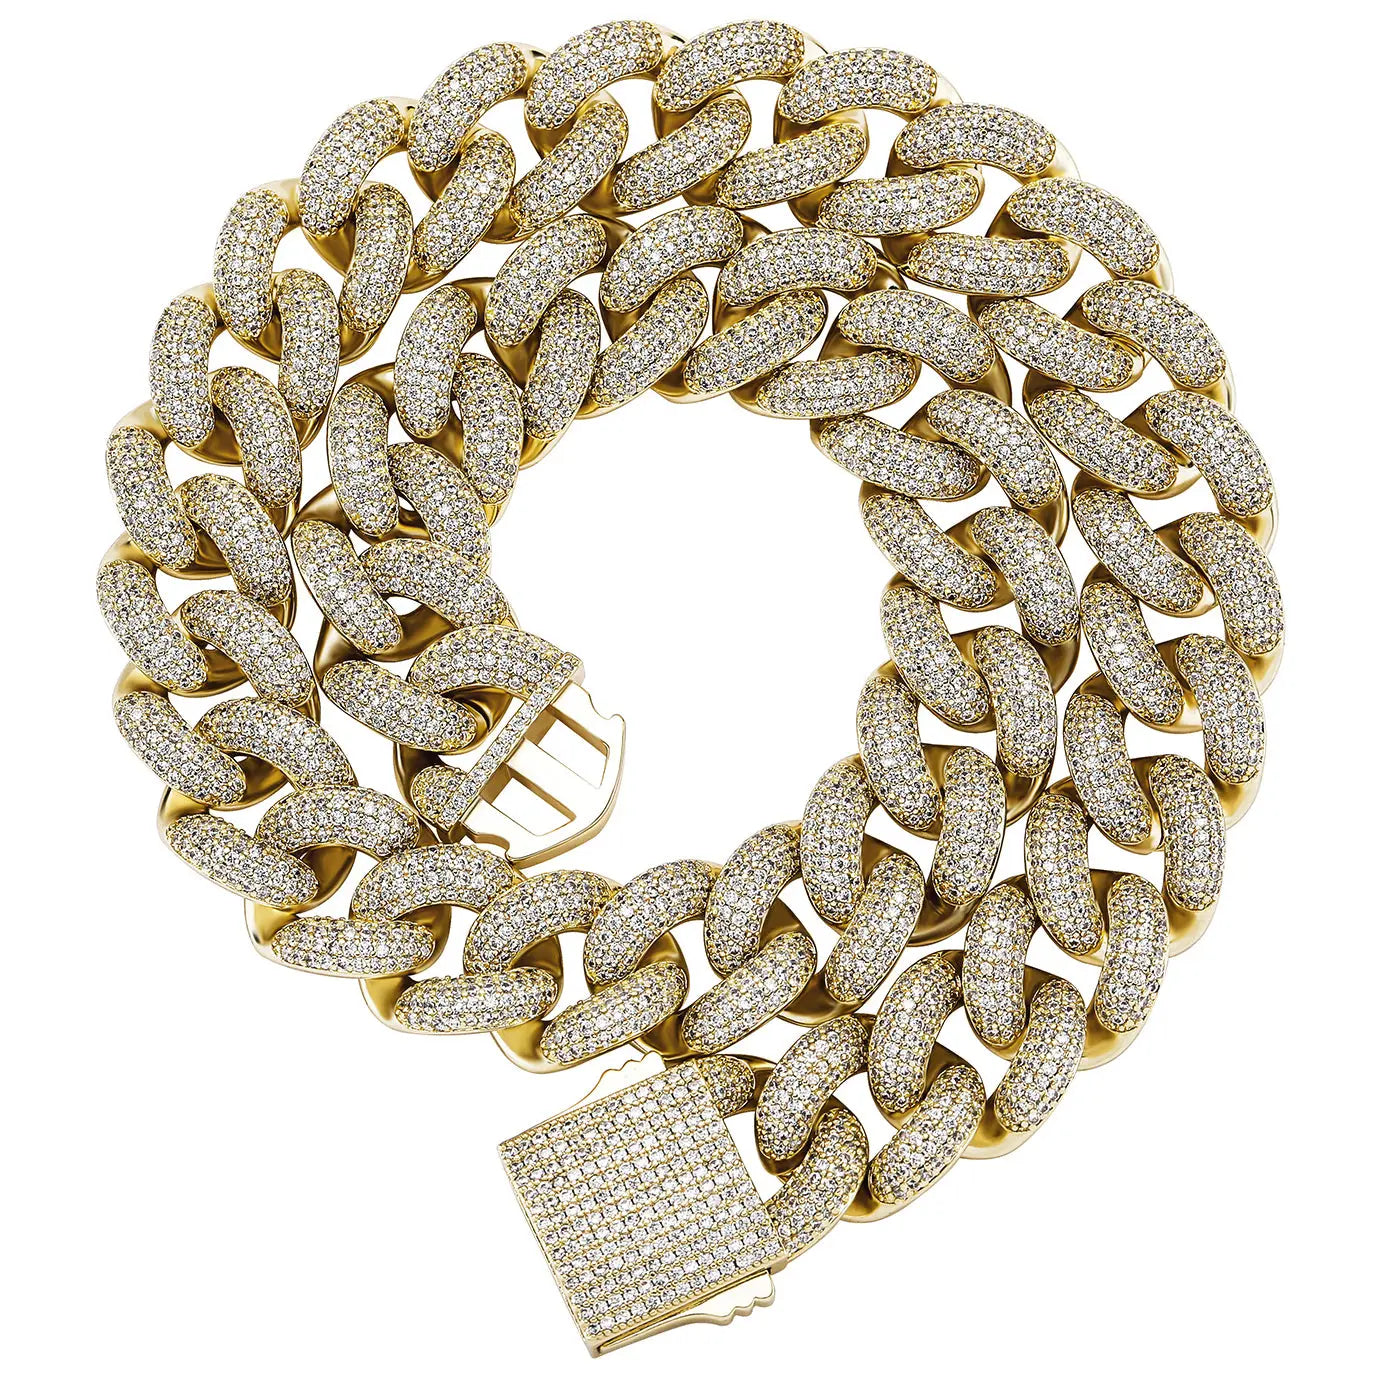 20mm Iced Cuban Link Chain in Yellow Gold 2255.9cm  The Icetruck